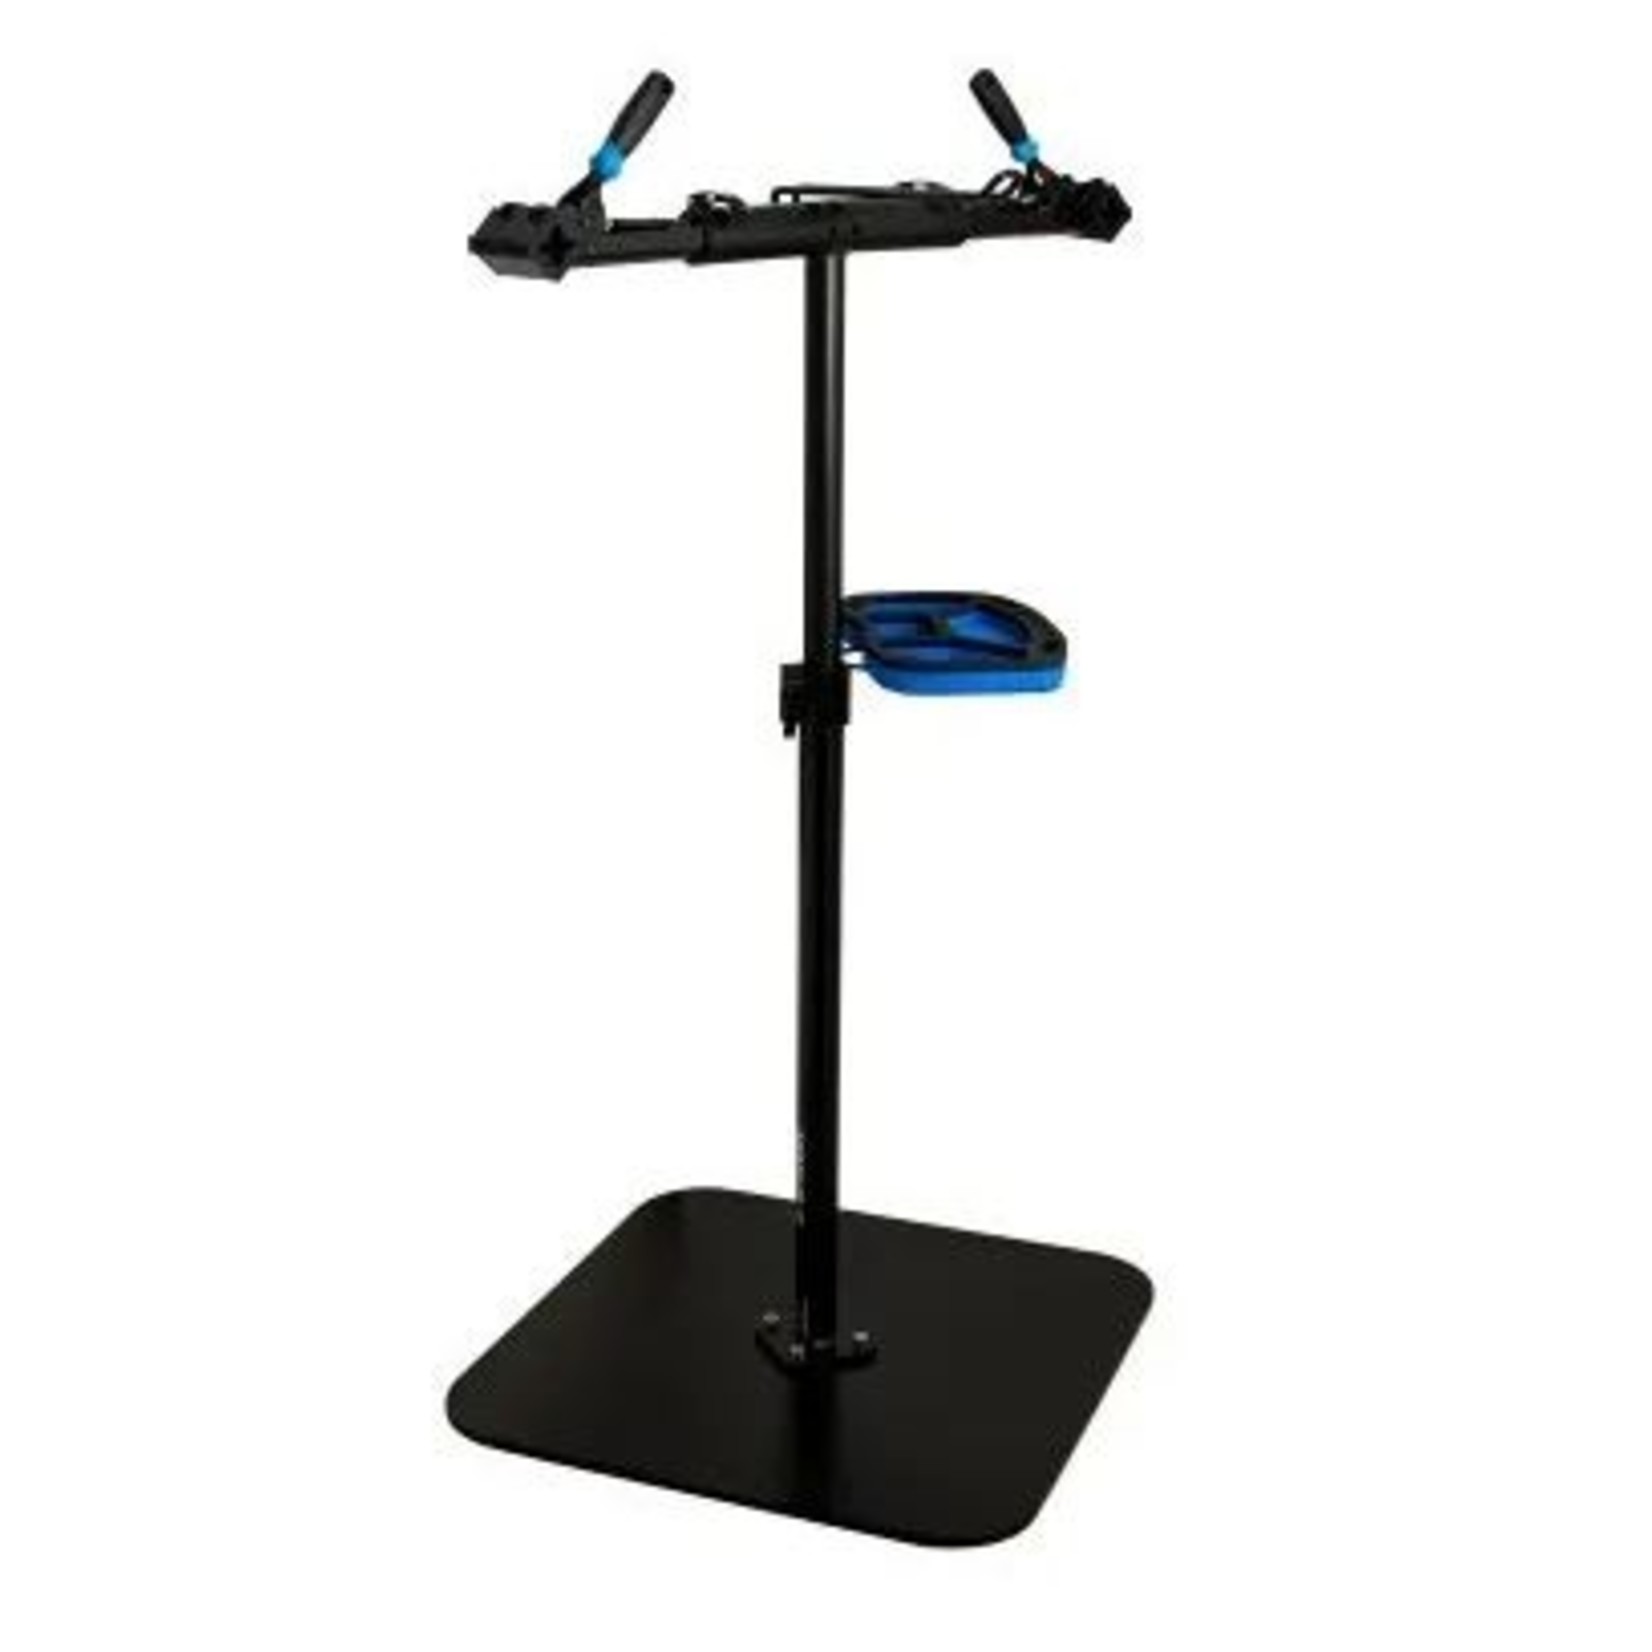 unior Unior Dual Head Workstand With Auto Adjust Head (Sprung Clamp) Bicycle Tool